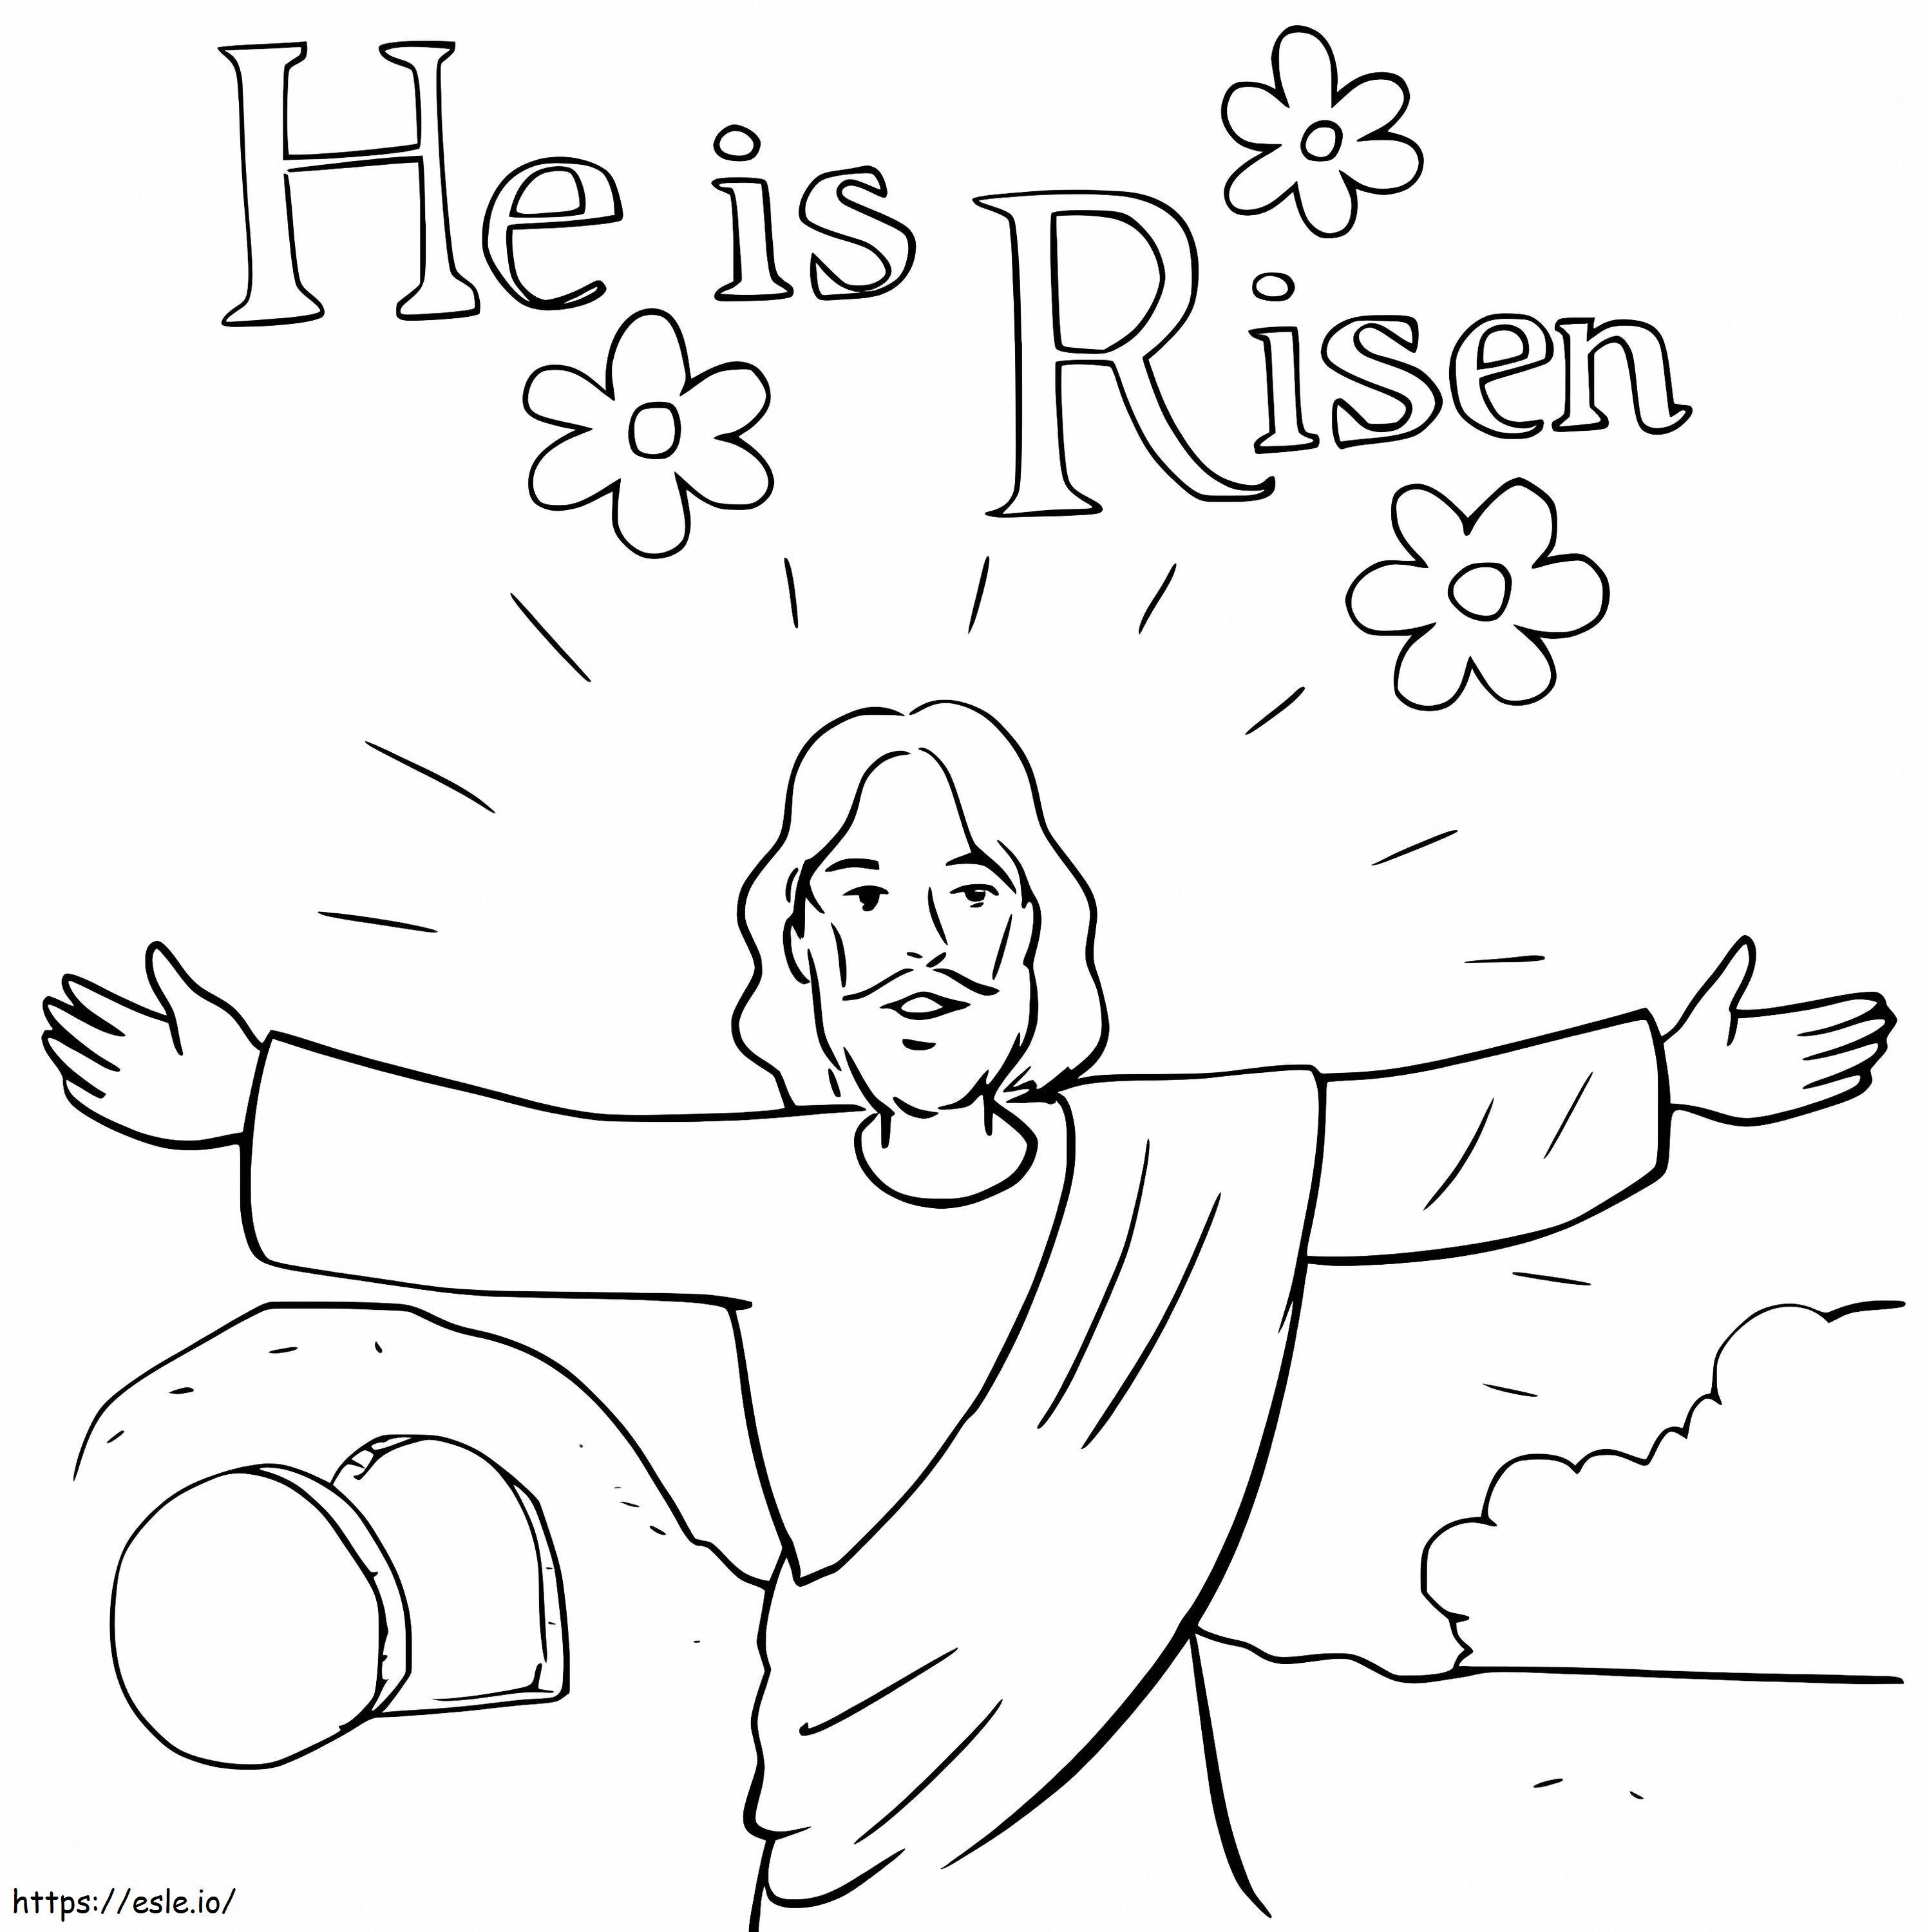 Printable He Is Risen coloring page